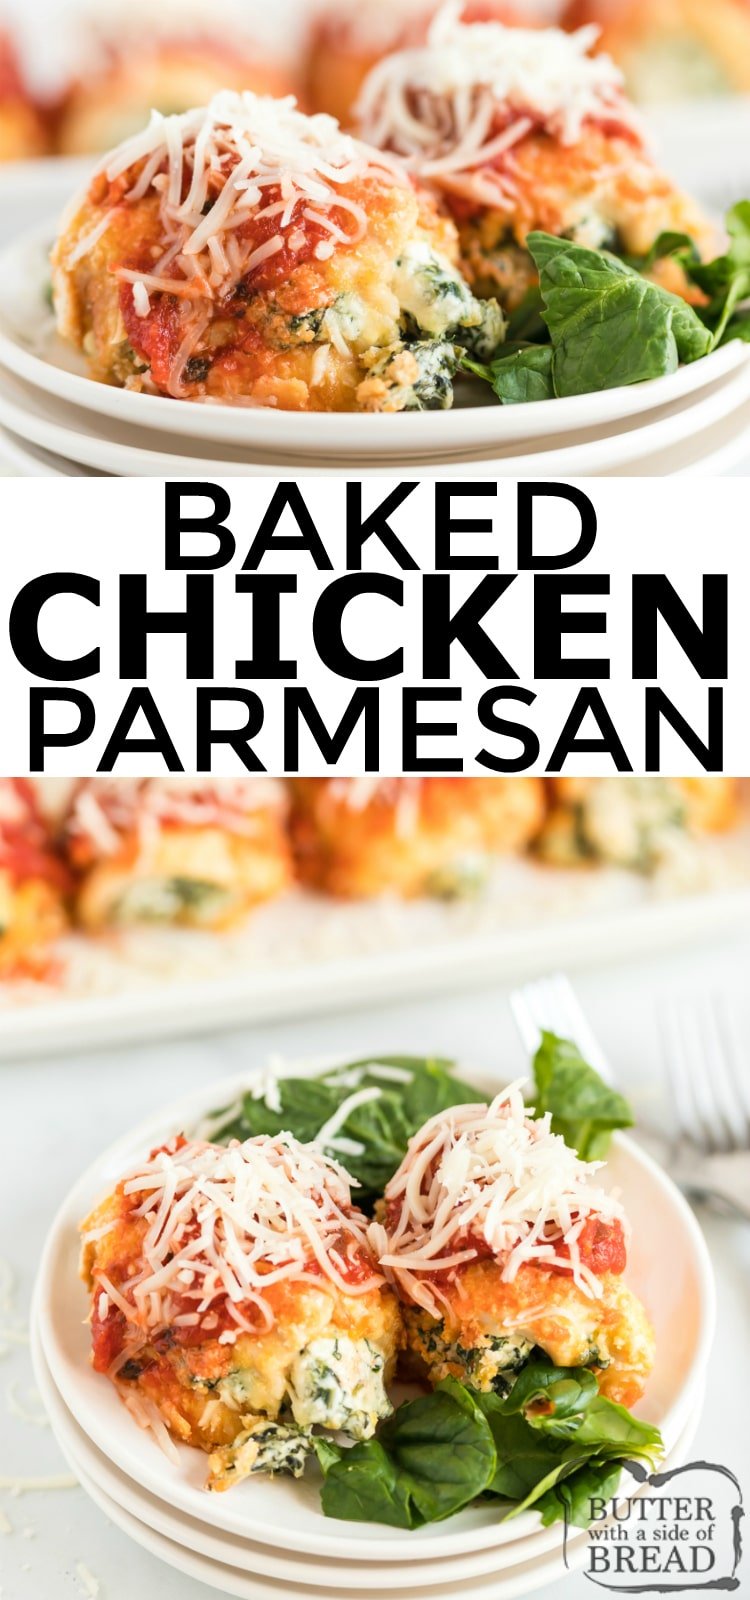 Baked Chicken Parmesan recipe made with tenderized and breaded chicken breasts, baked and smothered in marinara sauce, and topped with melted mozzarella and parmesan cheese.  Your family is going to love this take on a lighter classic Italian easy chicken parmesan.